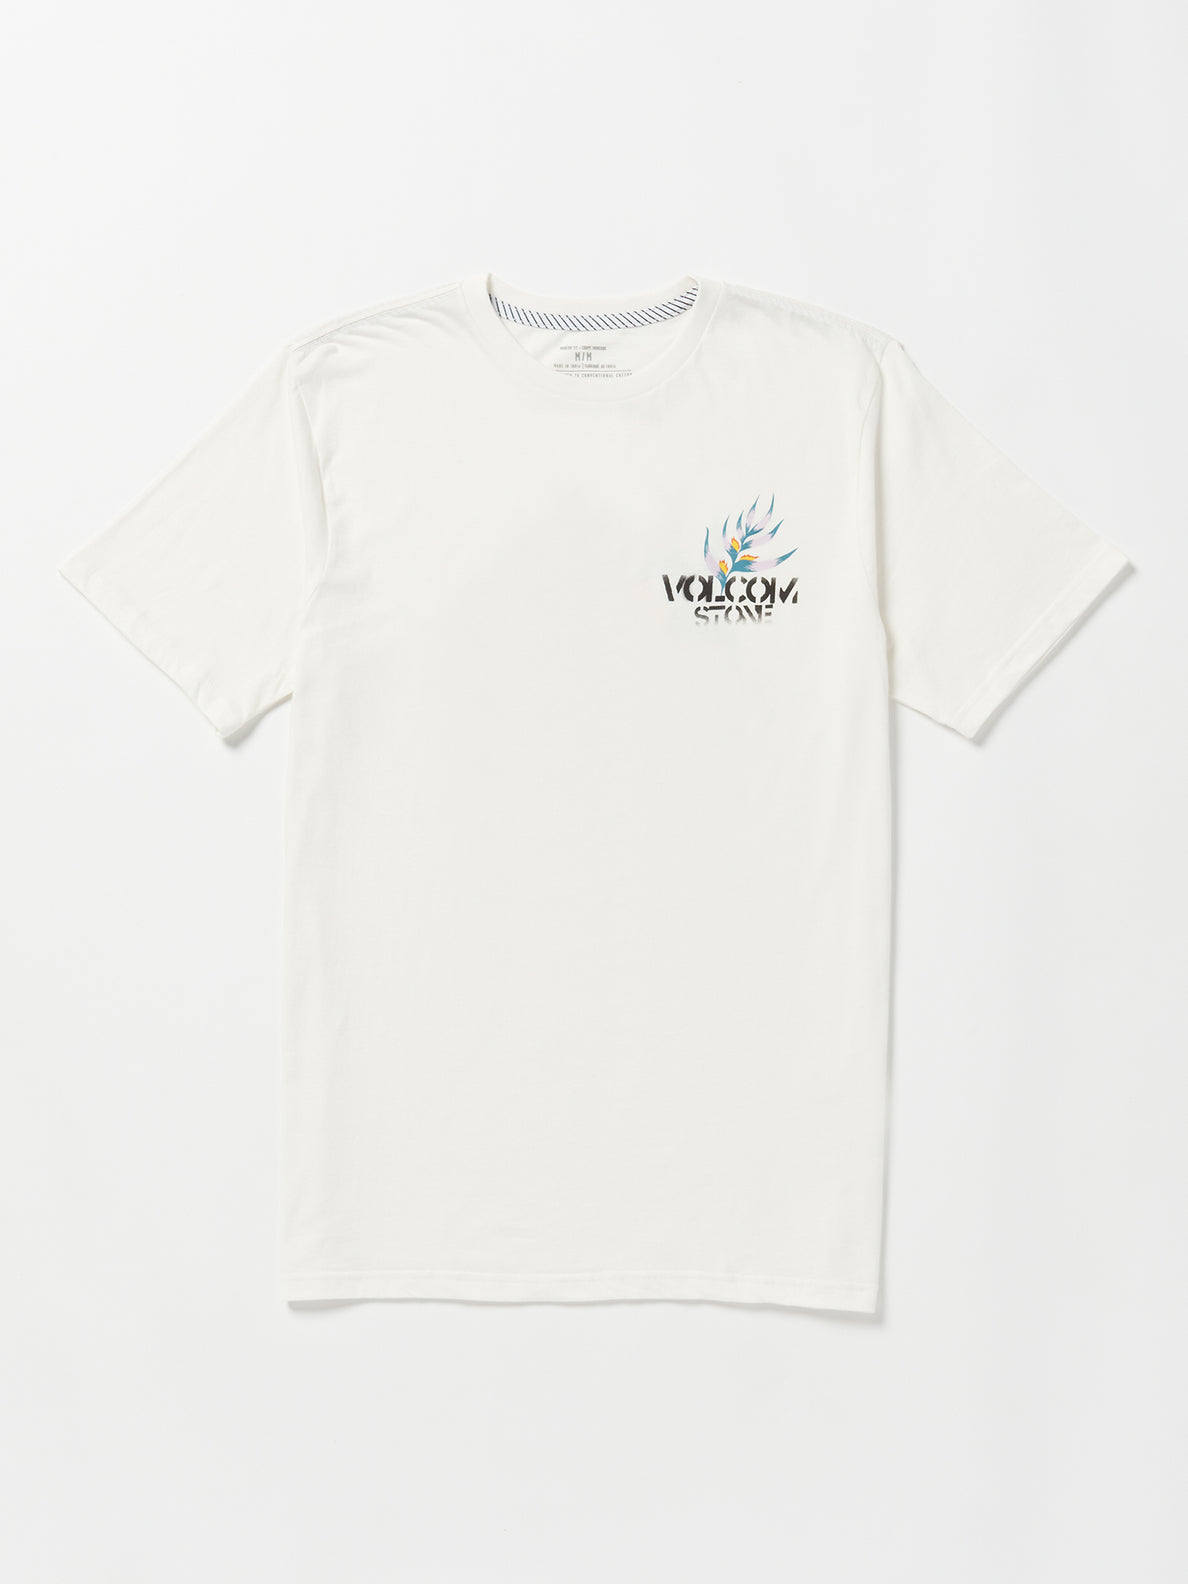 Aftermath Short Sleeve Tee - Off White (A5032304_OFW) [F]